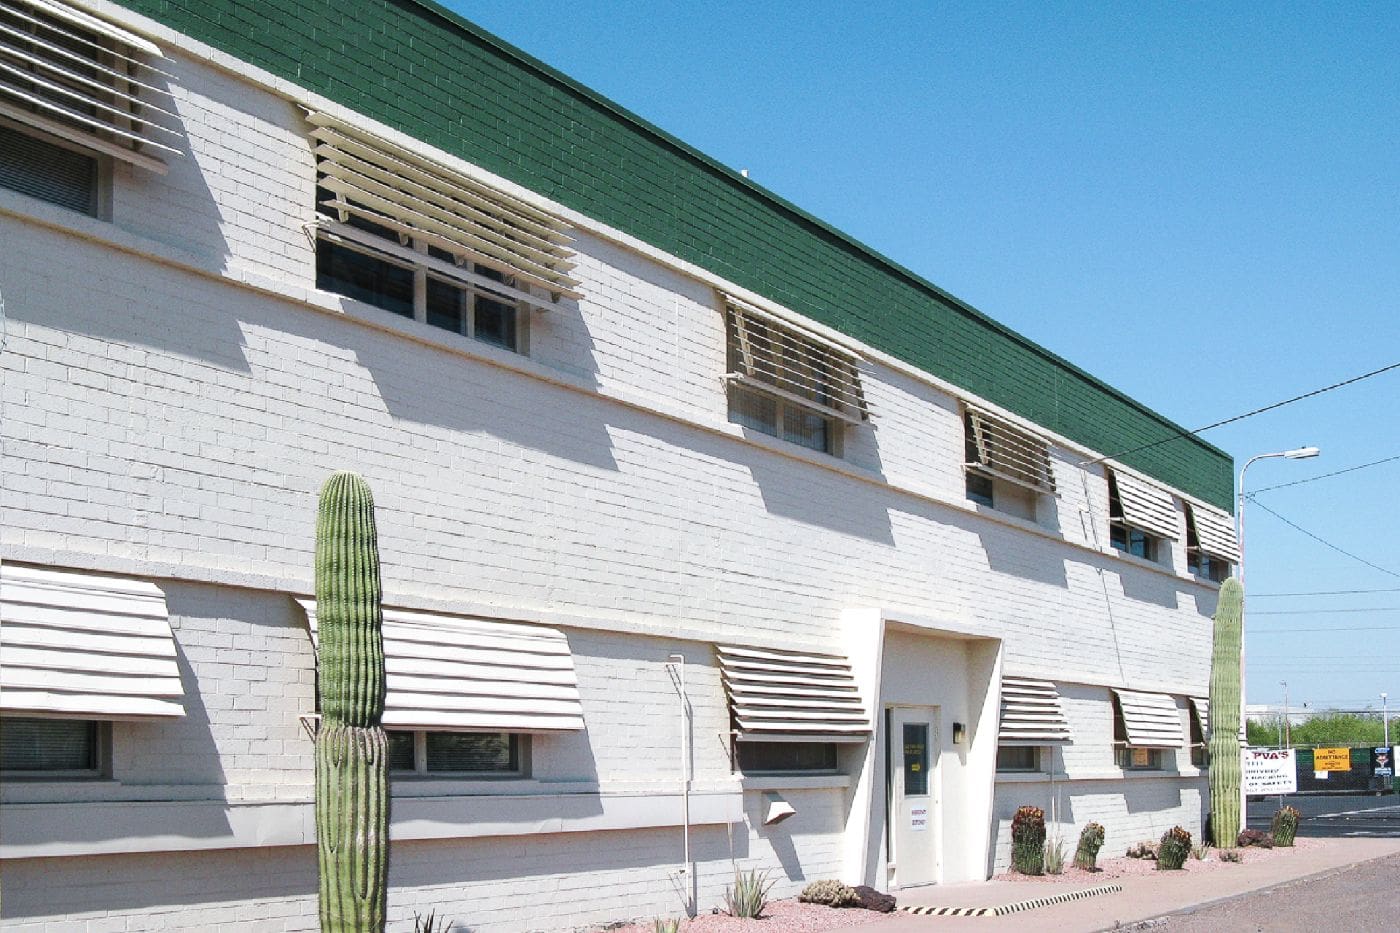 Scottsdale Is Booming – How to Find the Best Commercial Painting Contractor Near Me